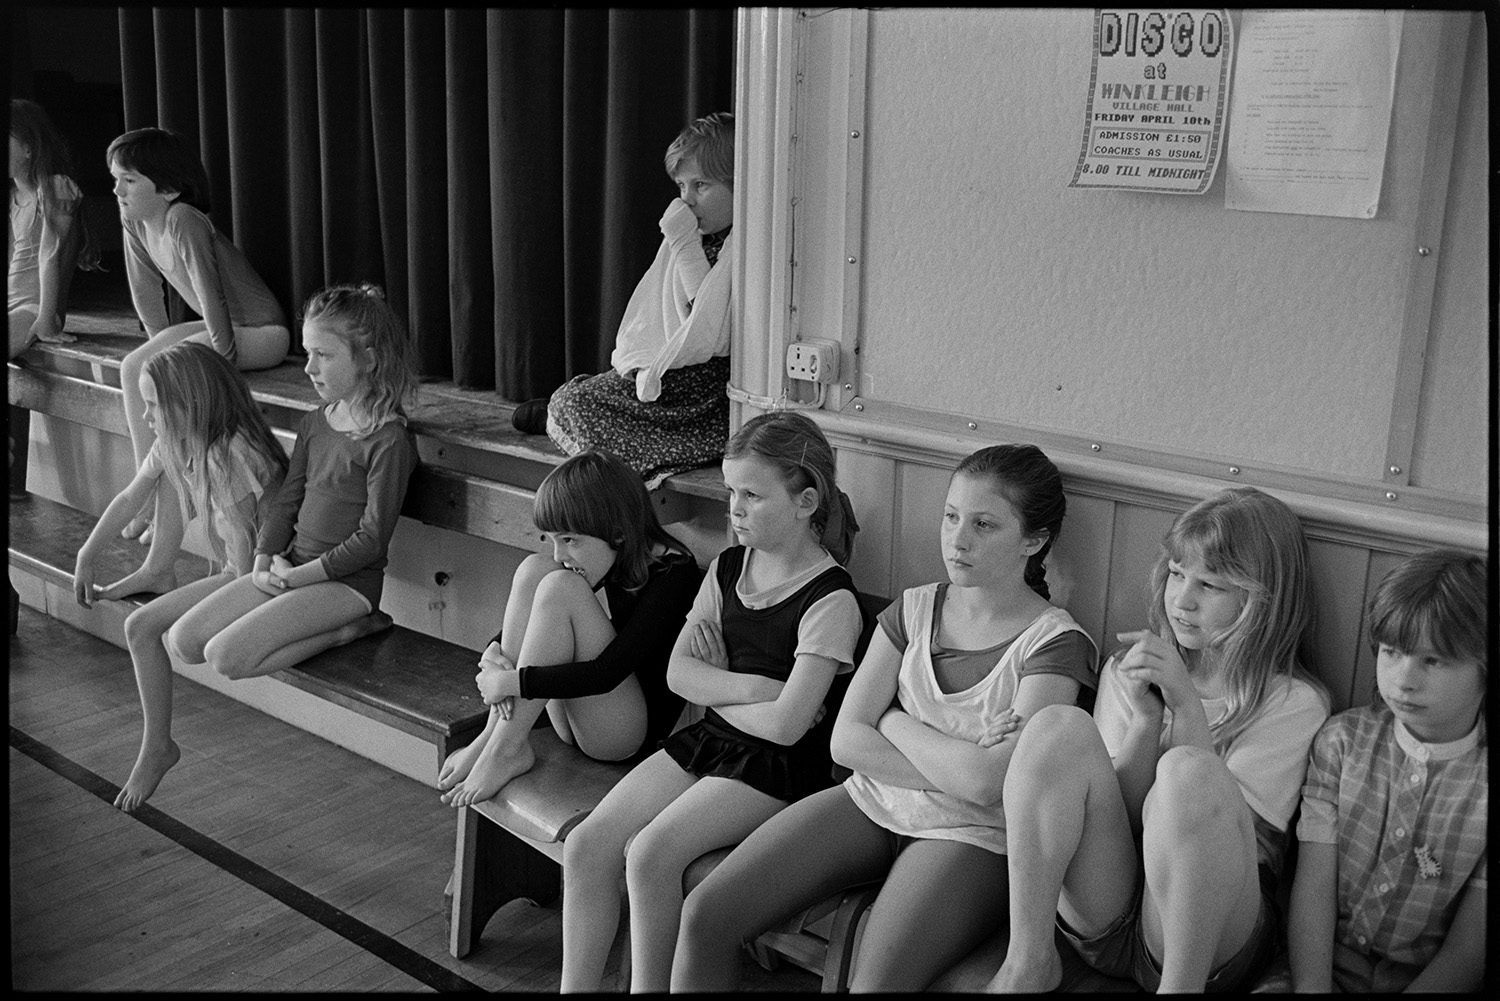 Dance class, children dancing performance in front of parents.
[A group of girls sitting on the stage and bench seats in Winkleigh Village Hall, attending Sally Barber's dance class and watching a performance in front of parents. A notice can be seen behind the children advertising a Disco in the village hall.]